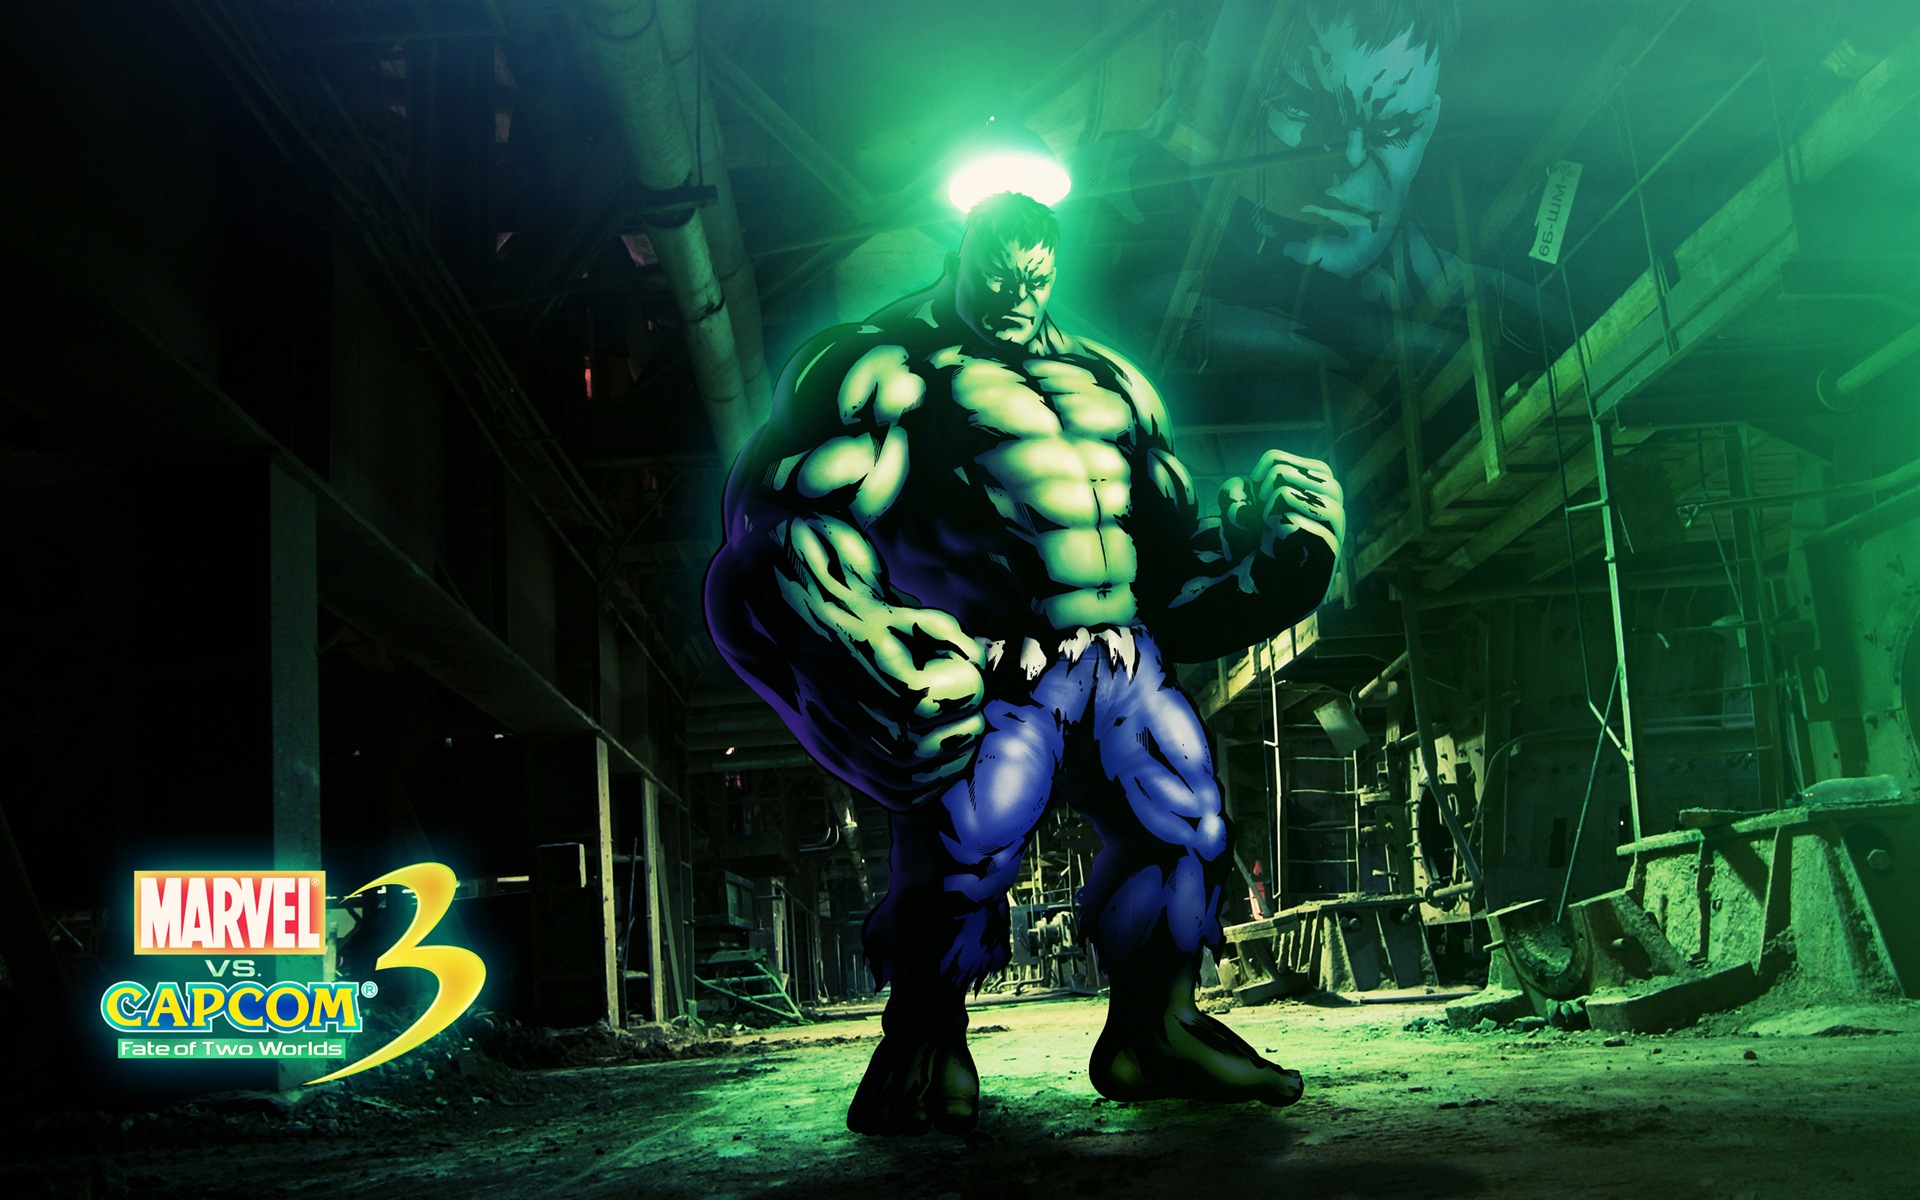 Marvel VS. Capcom 3: Fate of Two Worlds wallpapers HD herní #11 - 1920x1200